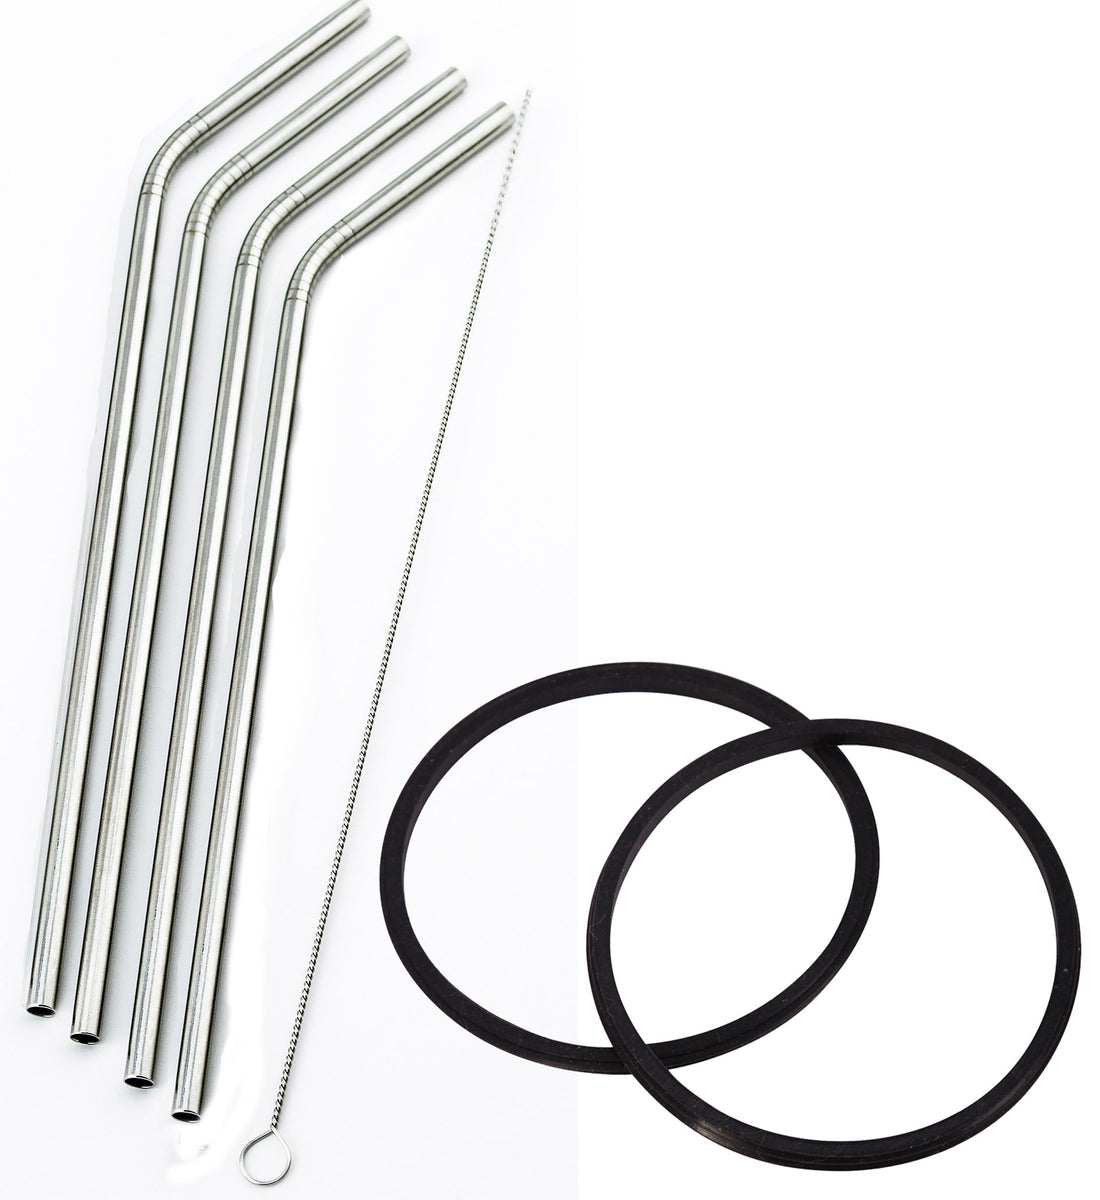  6pcs Replacement Rubber Gaskets for Zak Designs Kelso